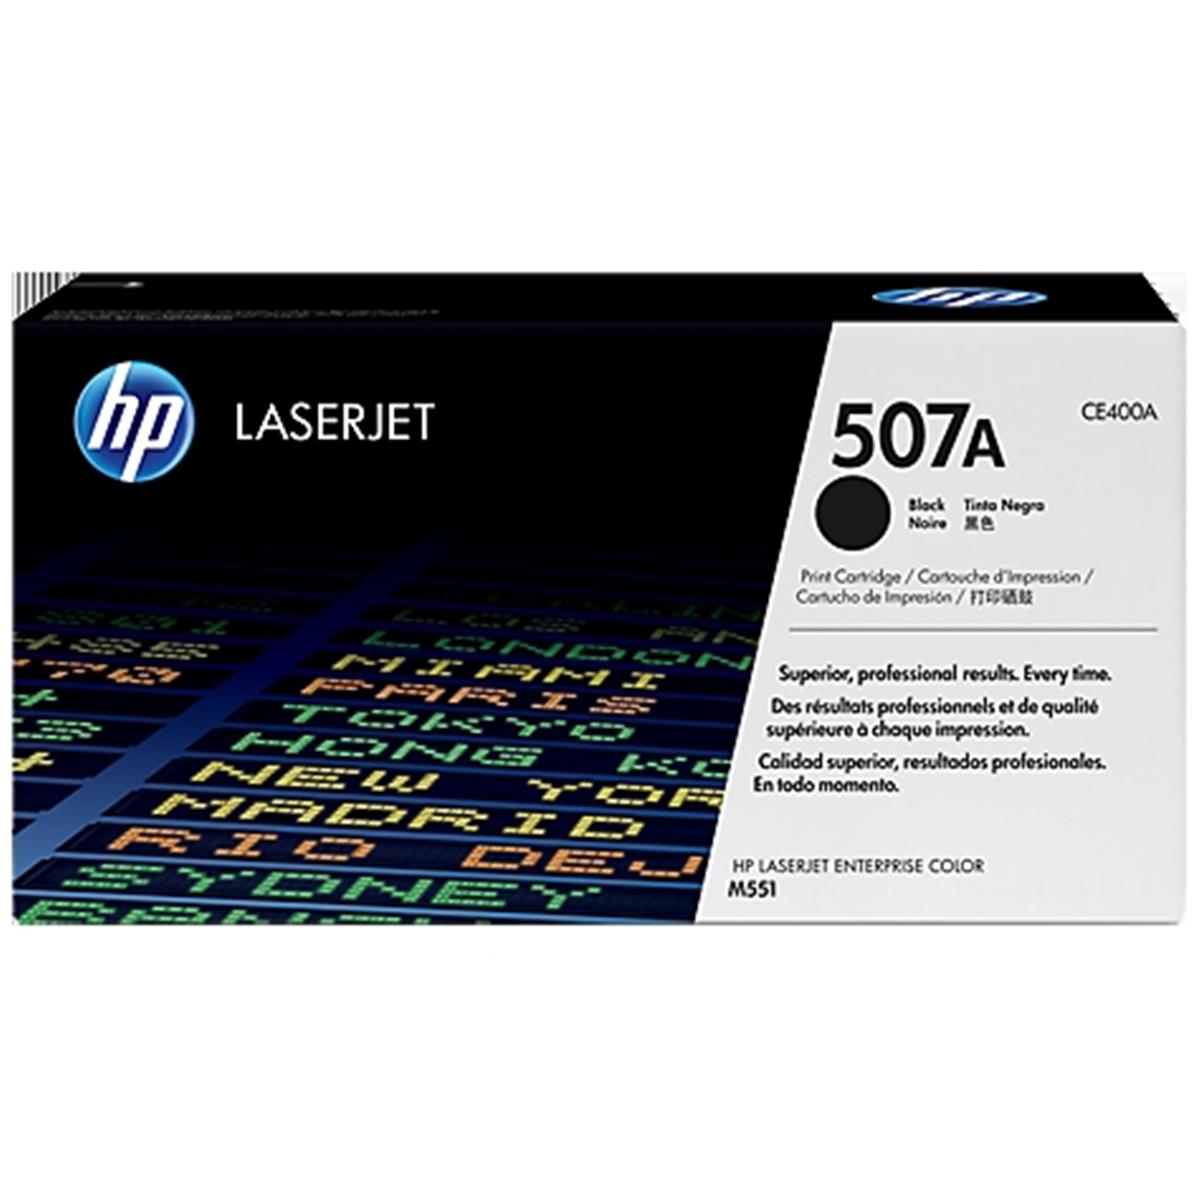 Picture of Aster Graphics AC-H0400AK CE400A HP Compatible Toner Cartridge - Black